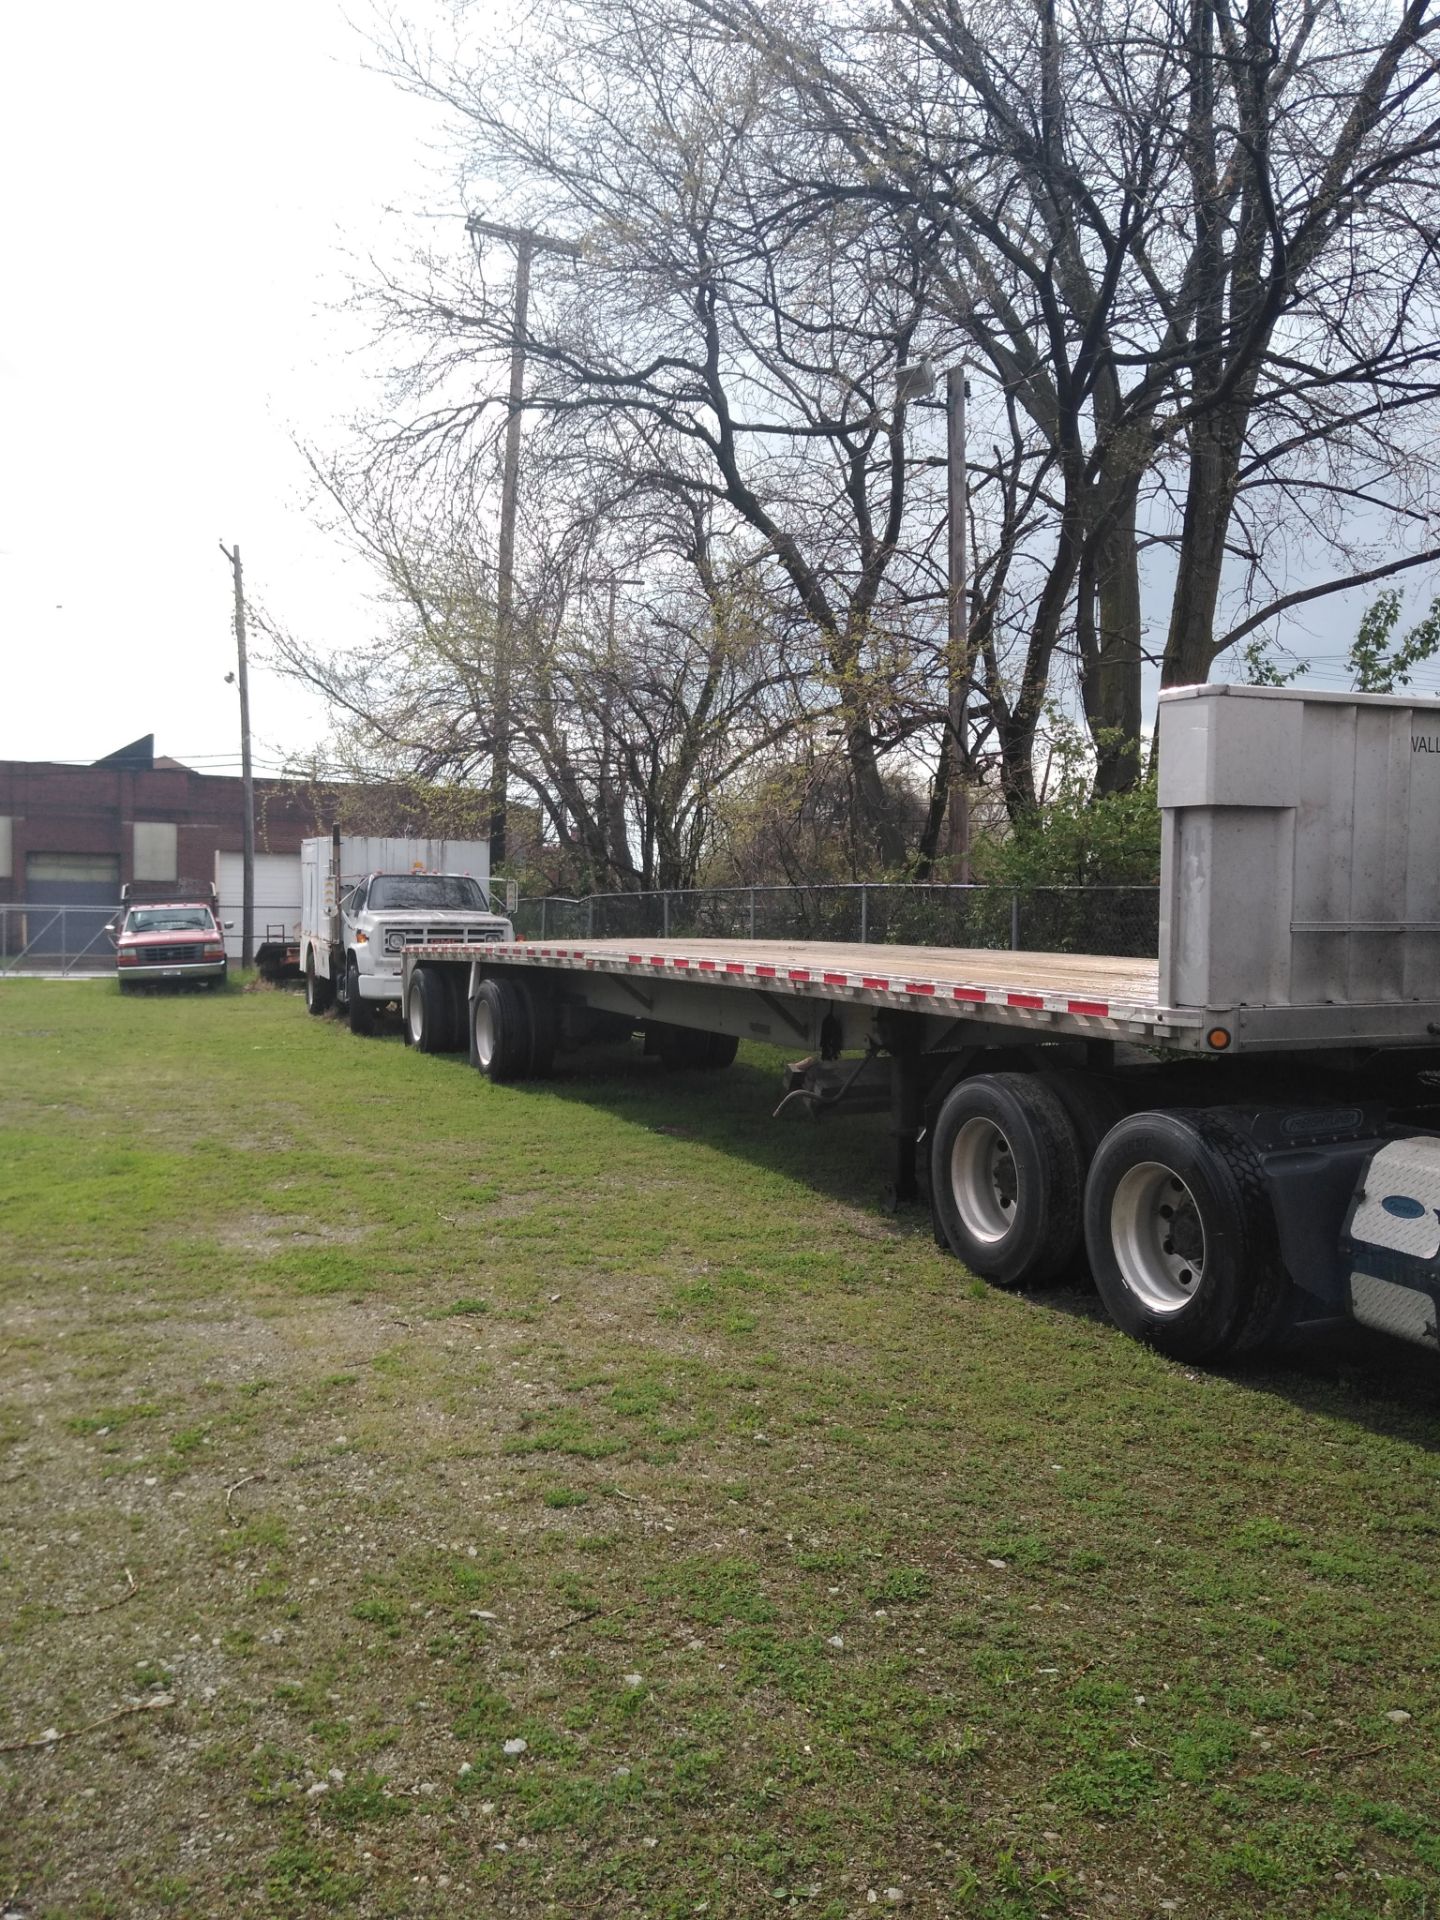 2004 48' REITNOUER MAXIMIZER FLAT BED TRAILER - Image 3 of 4